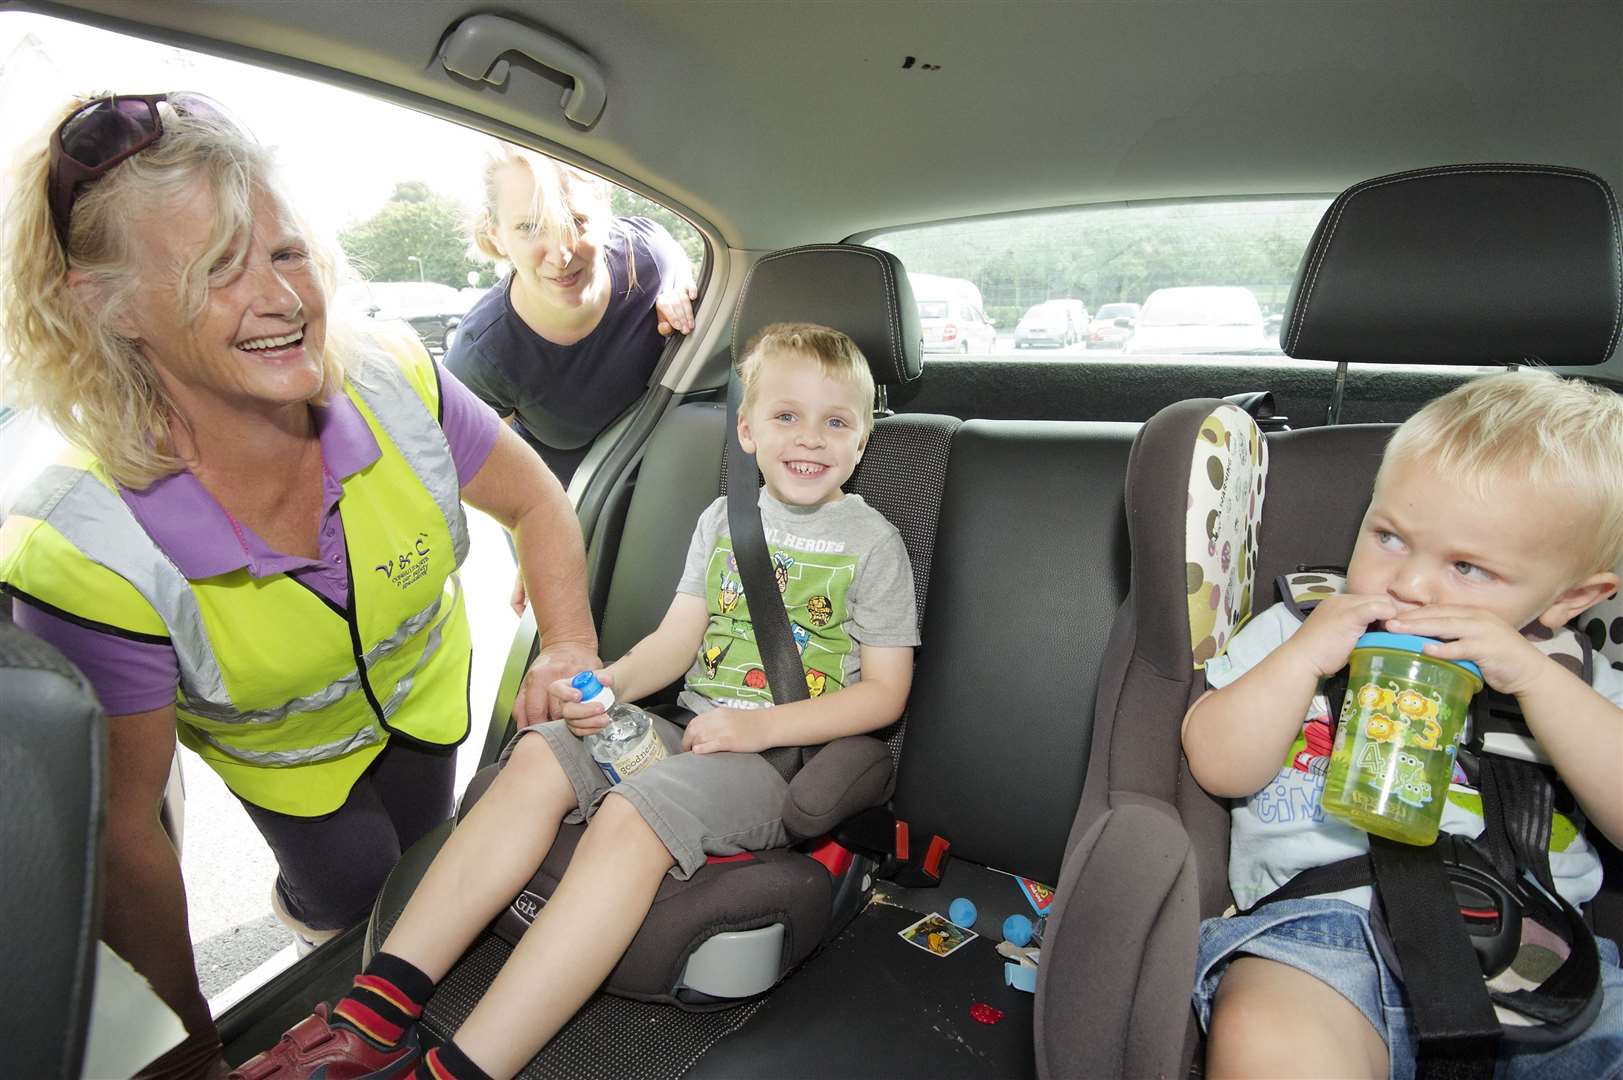 Car seat clinics are free and can check all restraints